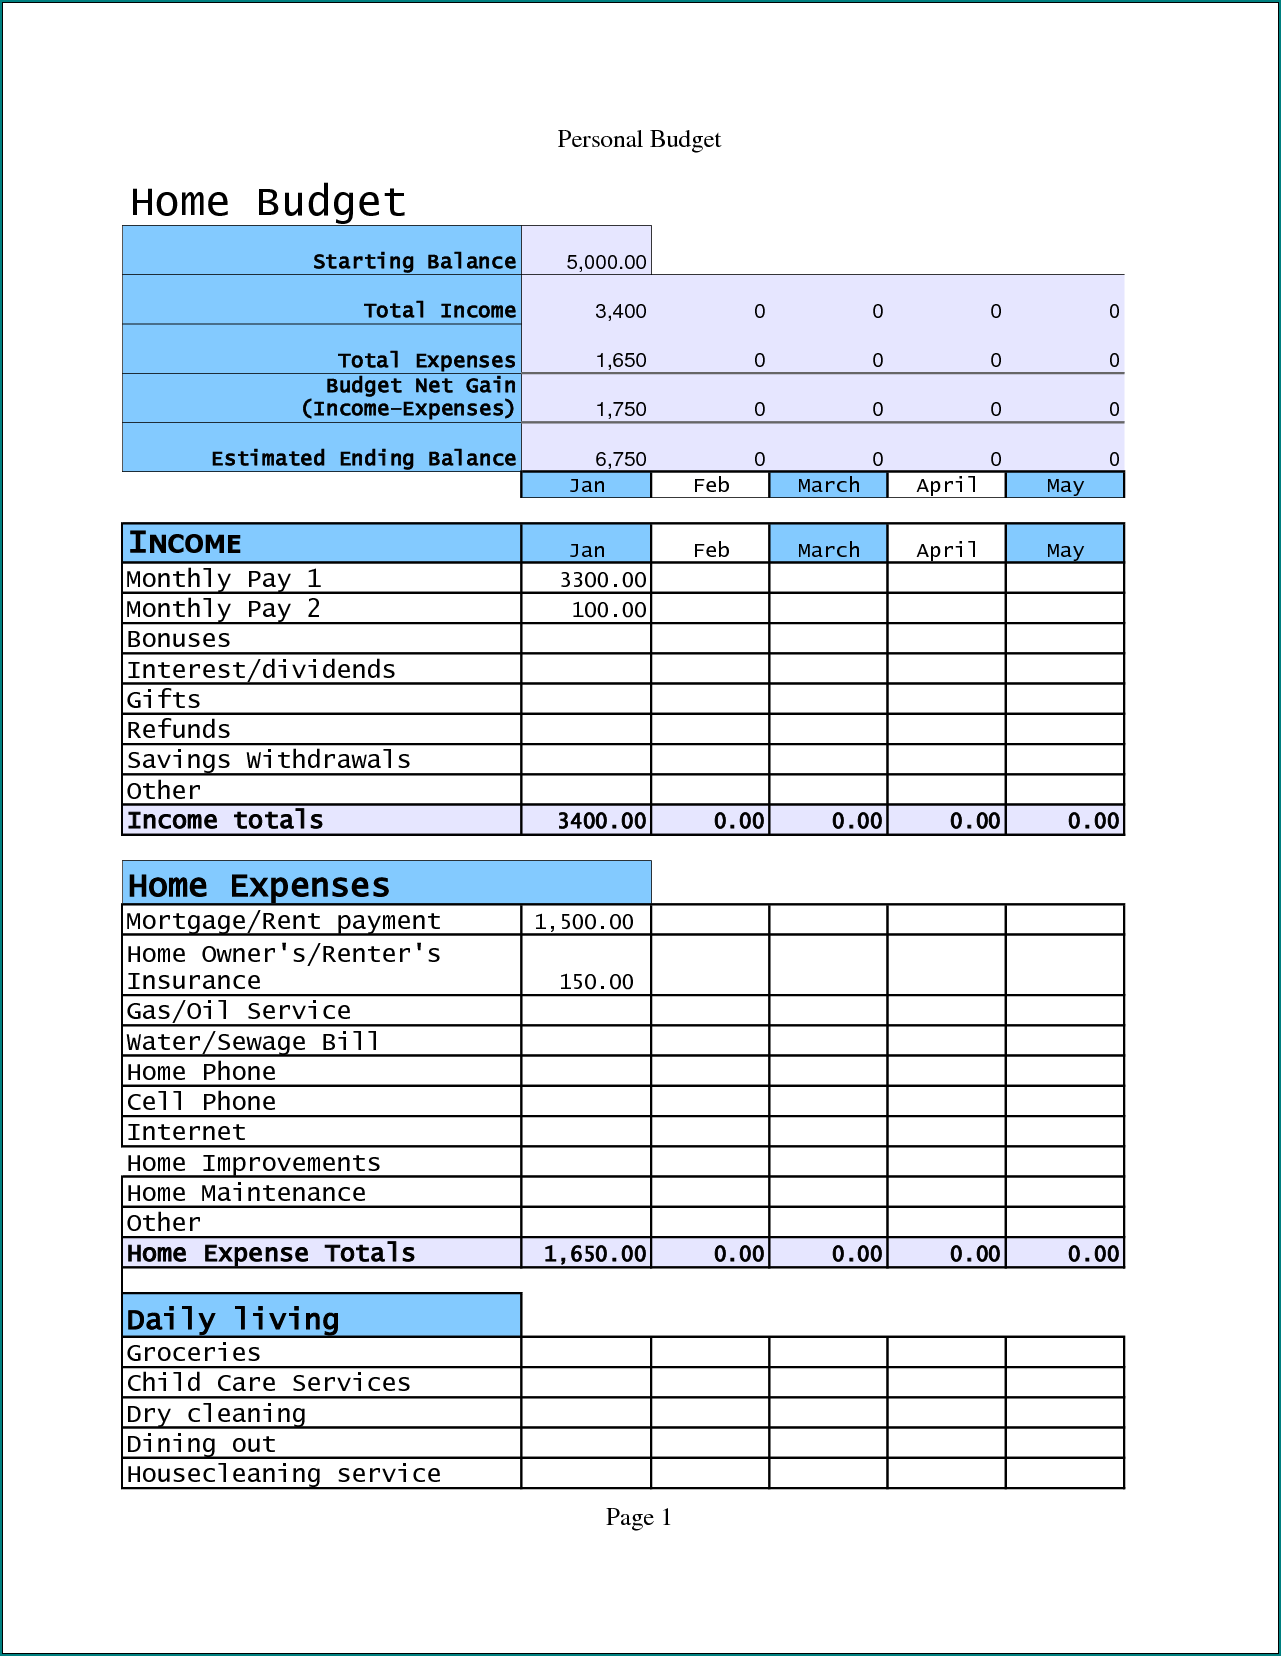 Example of Home Budget Template